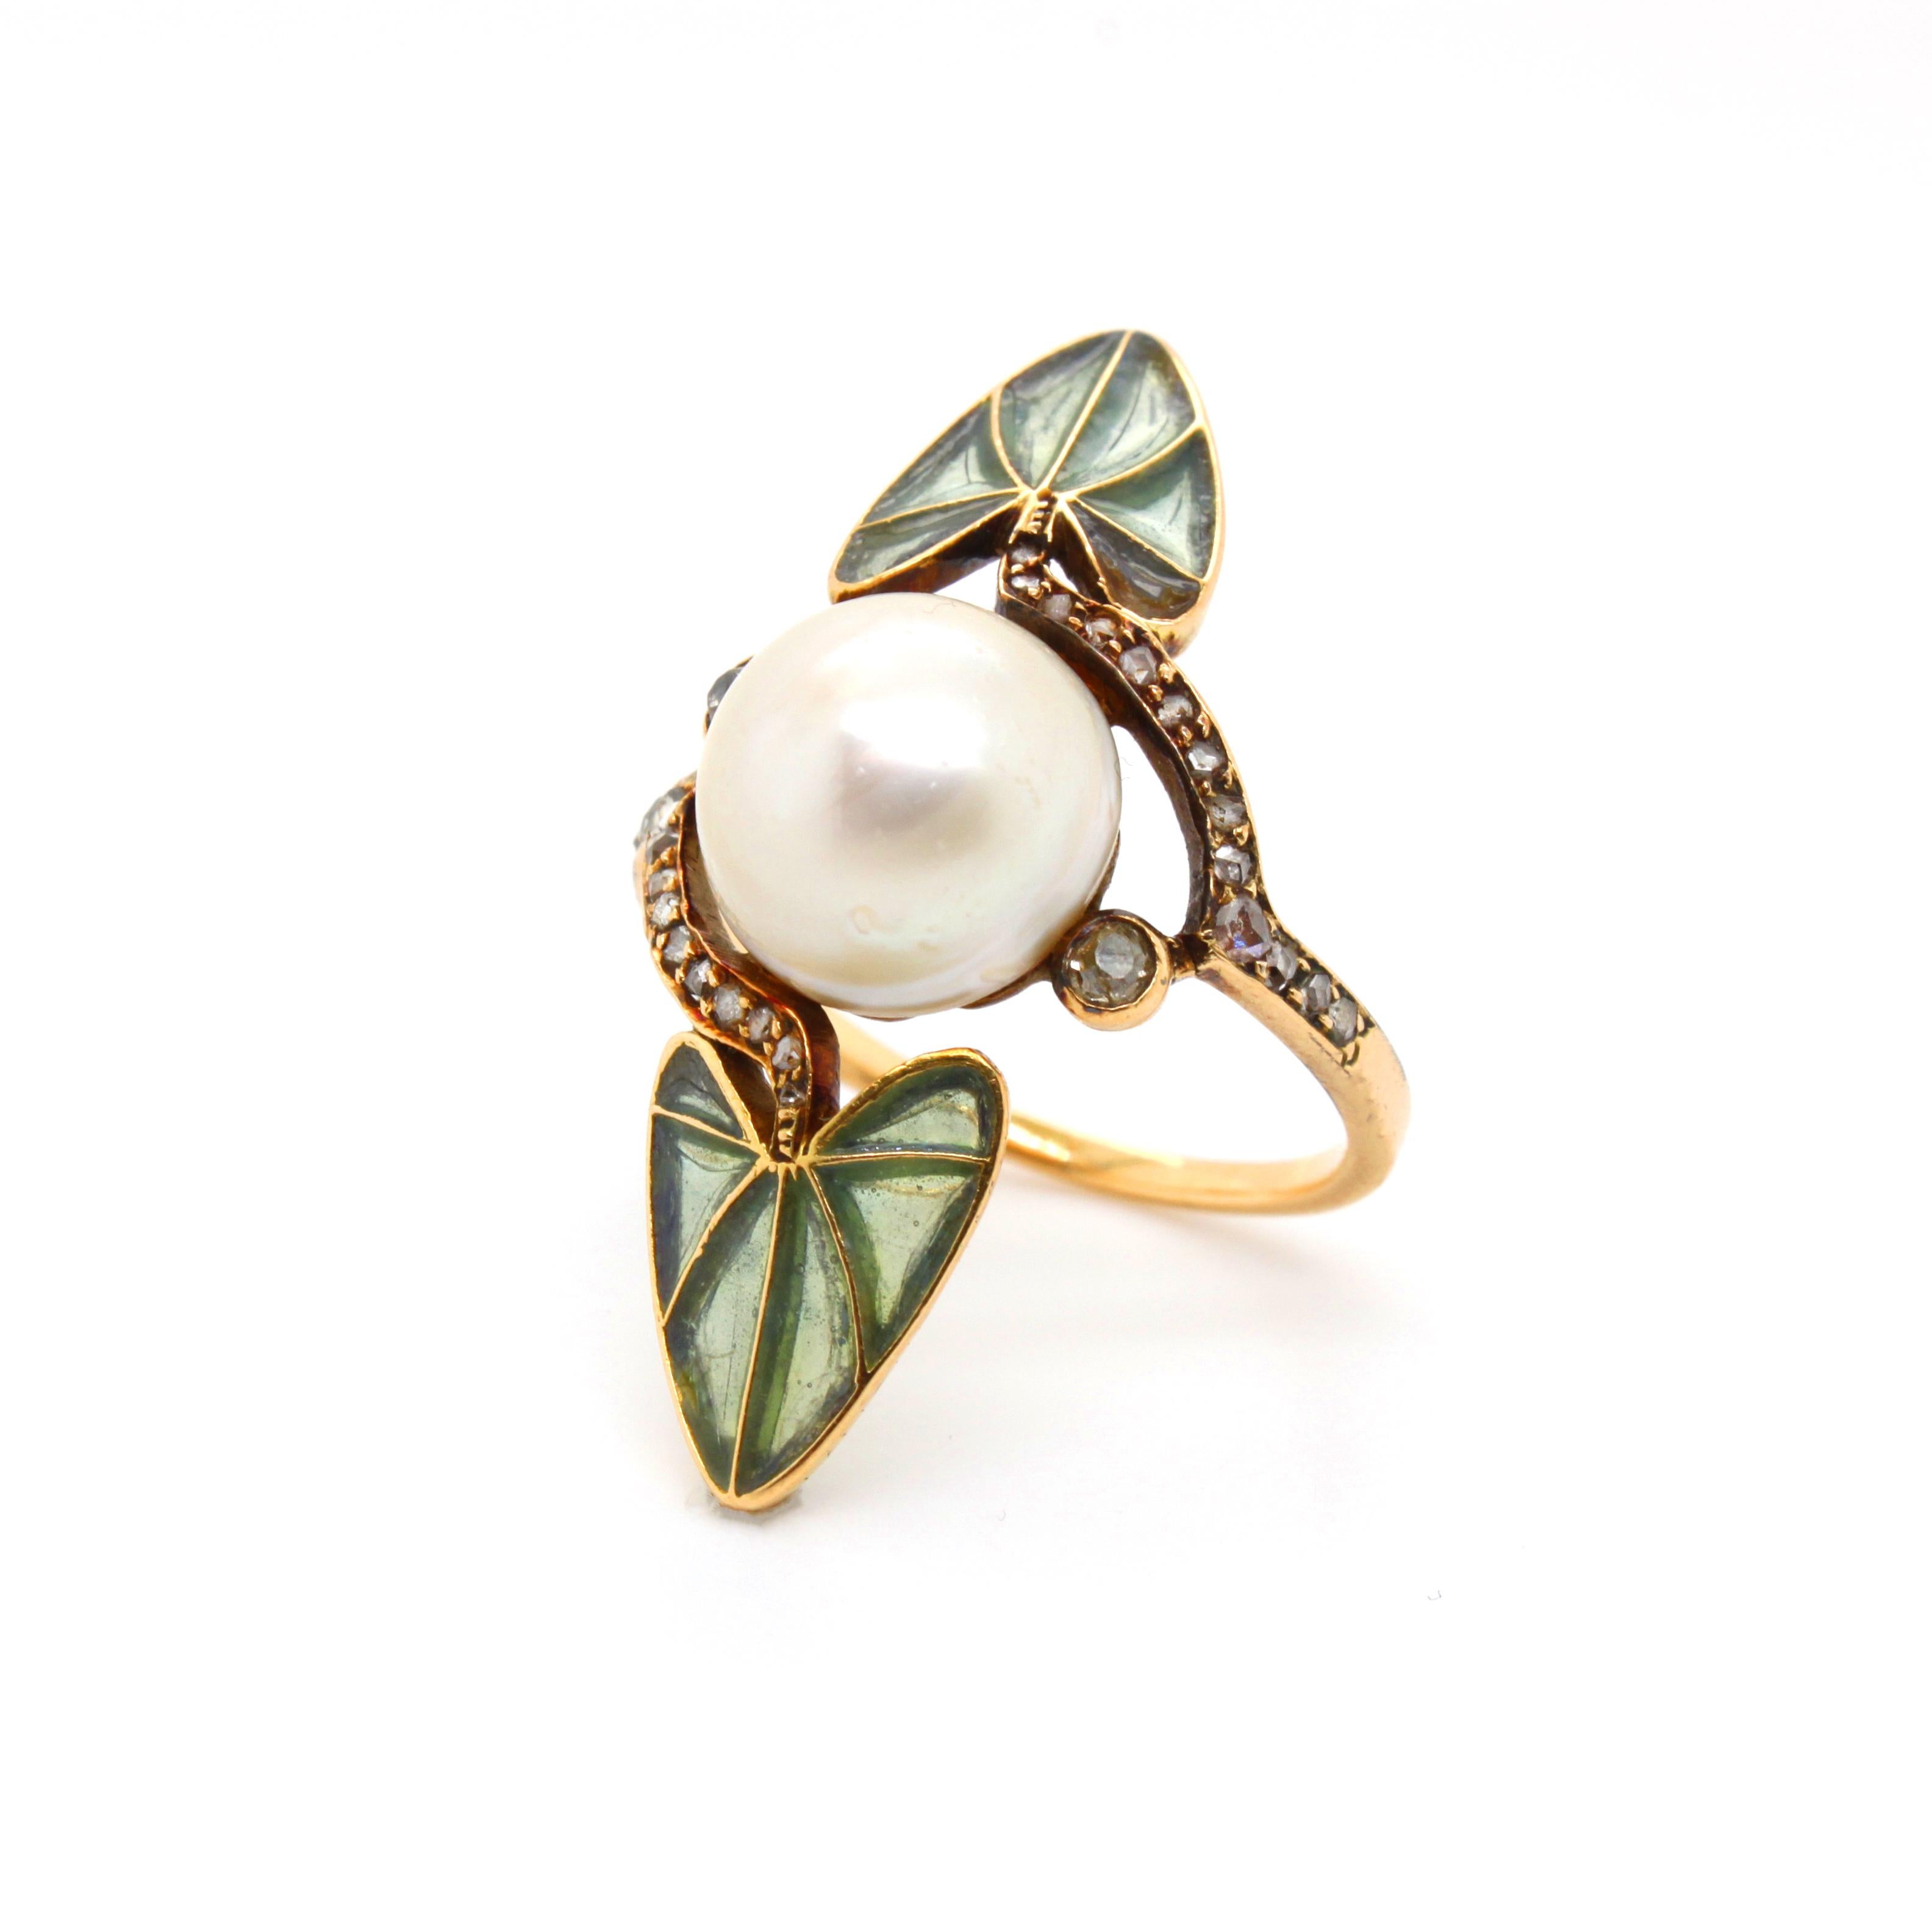 Rare René Lalique Art Nouveau Pearl and Enamel Ring, ca. 1900

This beautiful Art Nouveau ring features two greenish window-enamelled leafs and a freshwater pearl button in the center, accented with several smaller diamonds.
When held up to the